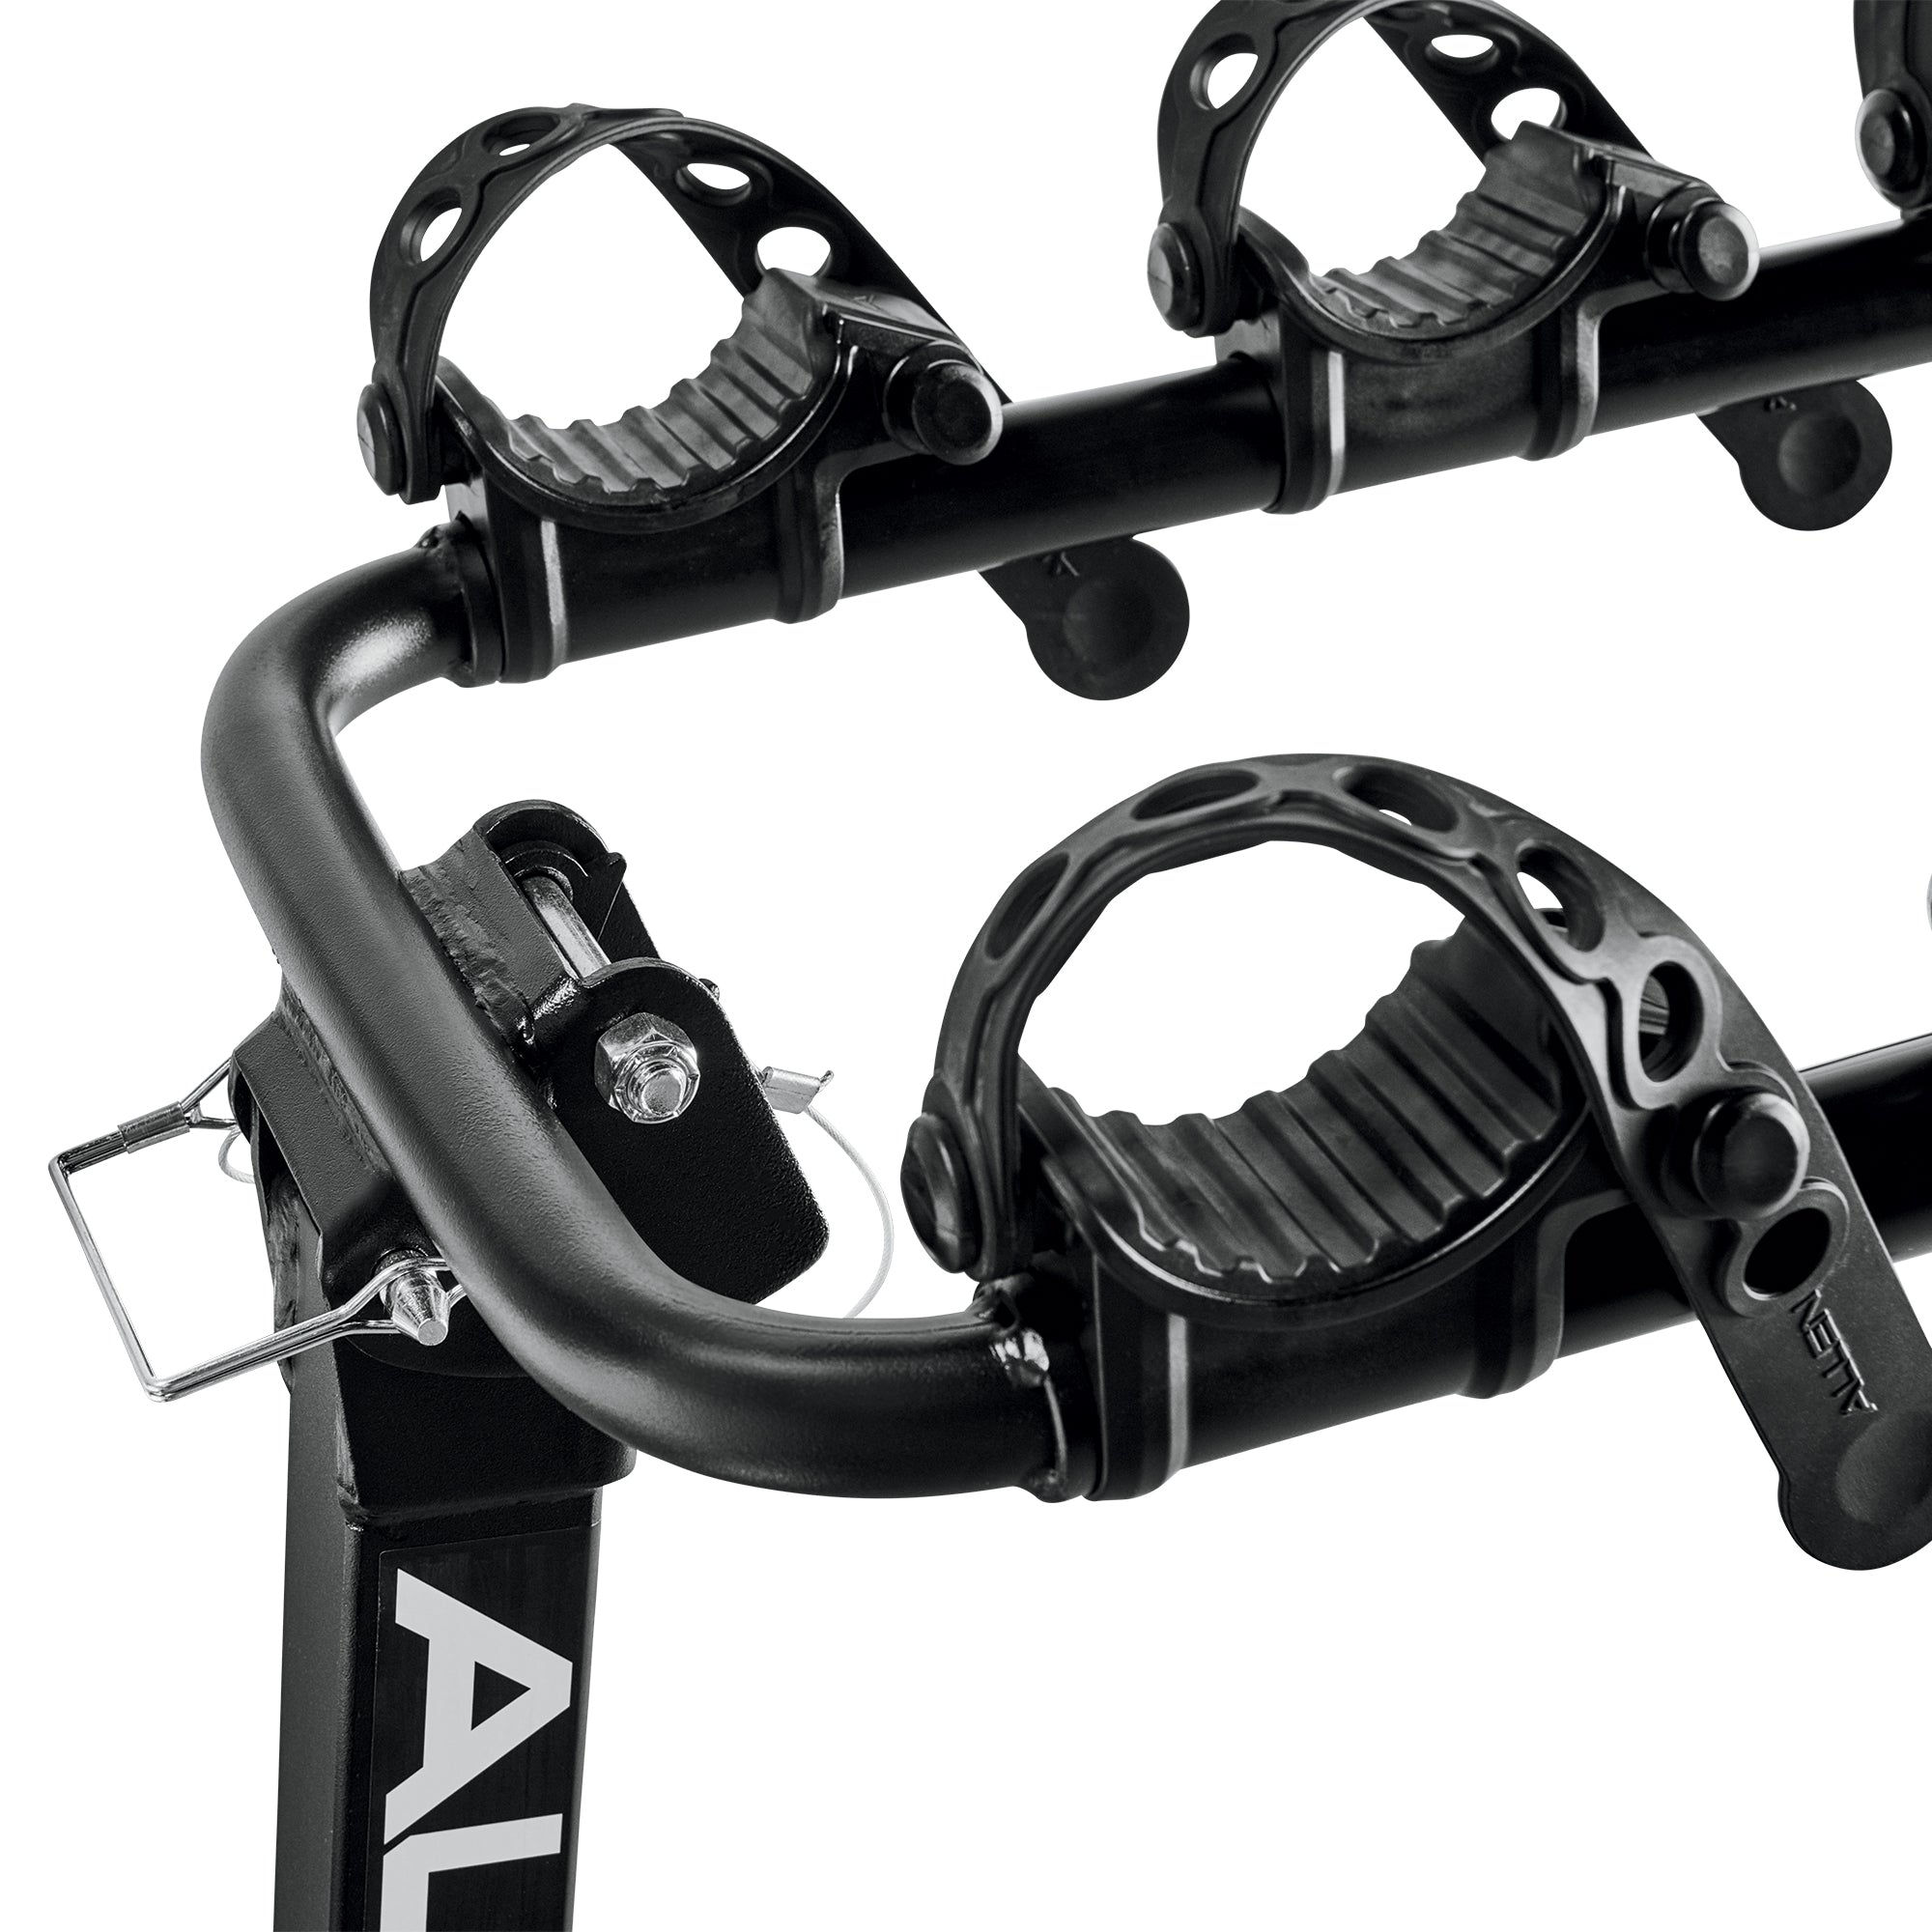 4 Bike Deluxe Hitch Racks 2" Receiver Locking Folding Tilting Carry Arms-Car & Truck Racks-AULEY